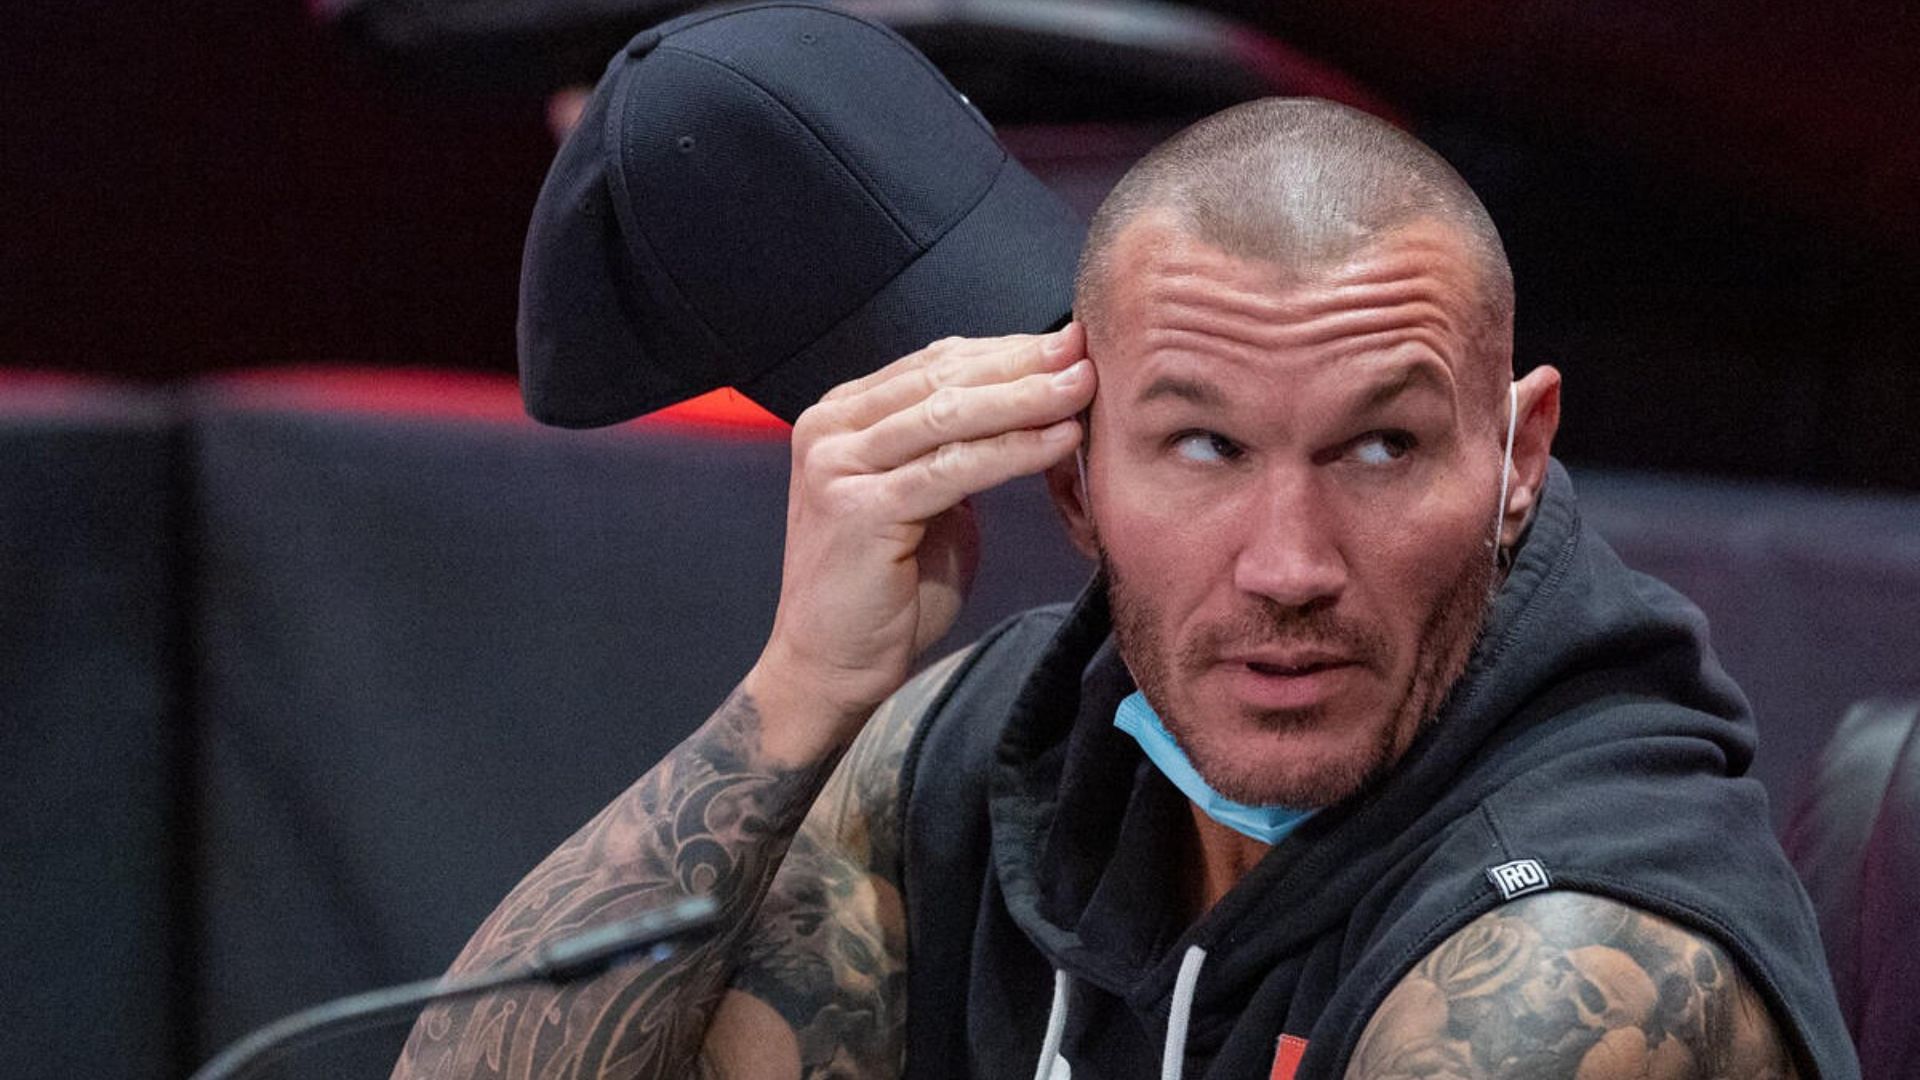 Randy Orton is one of the most popular names in WWE today.